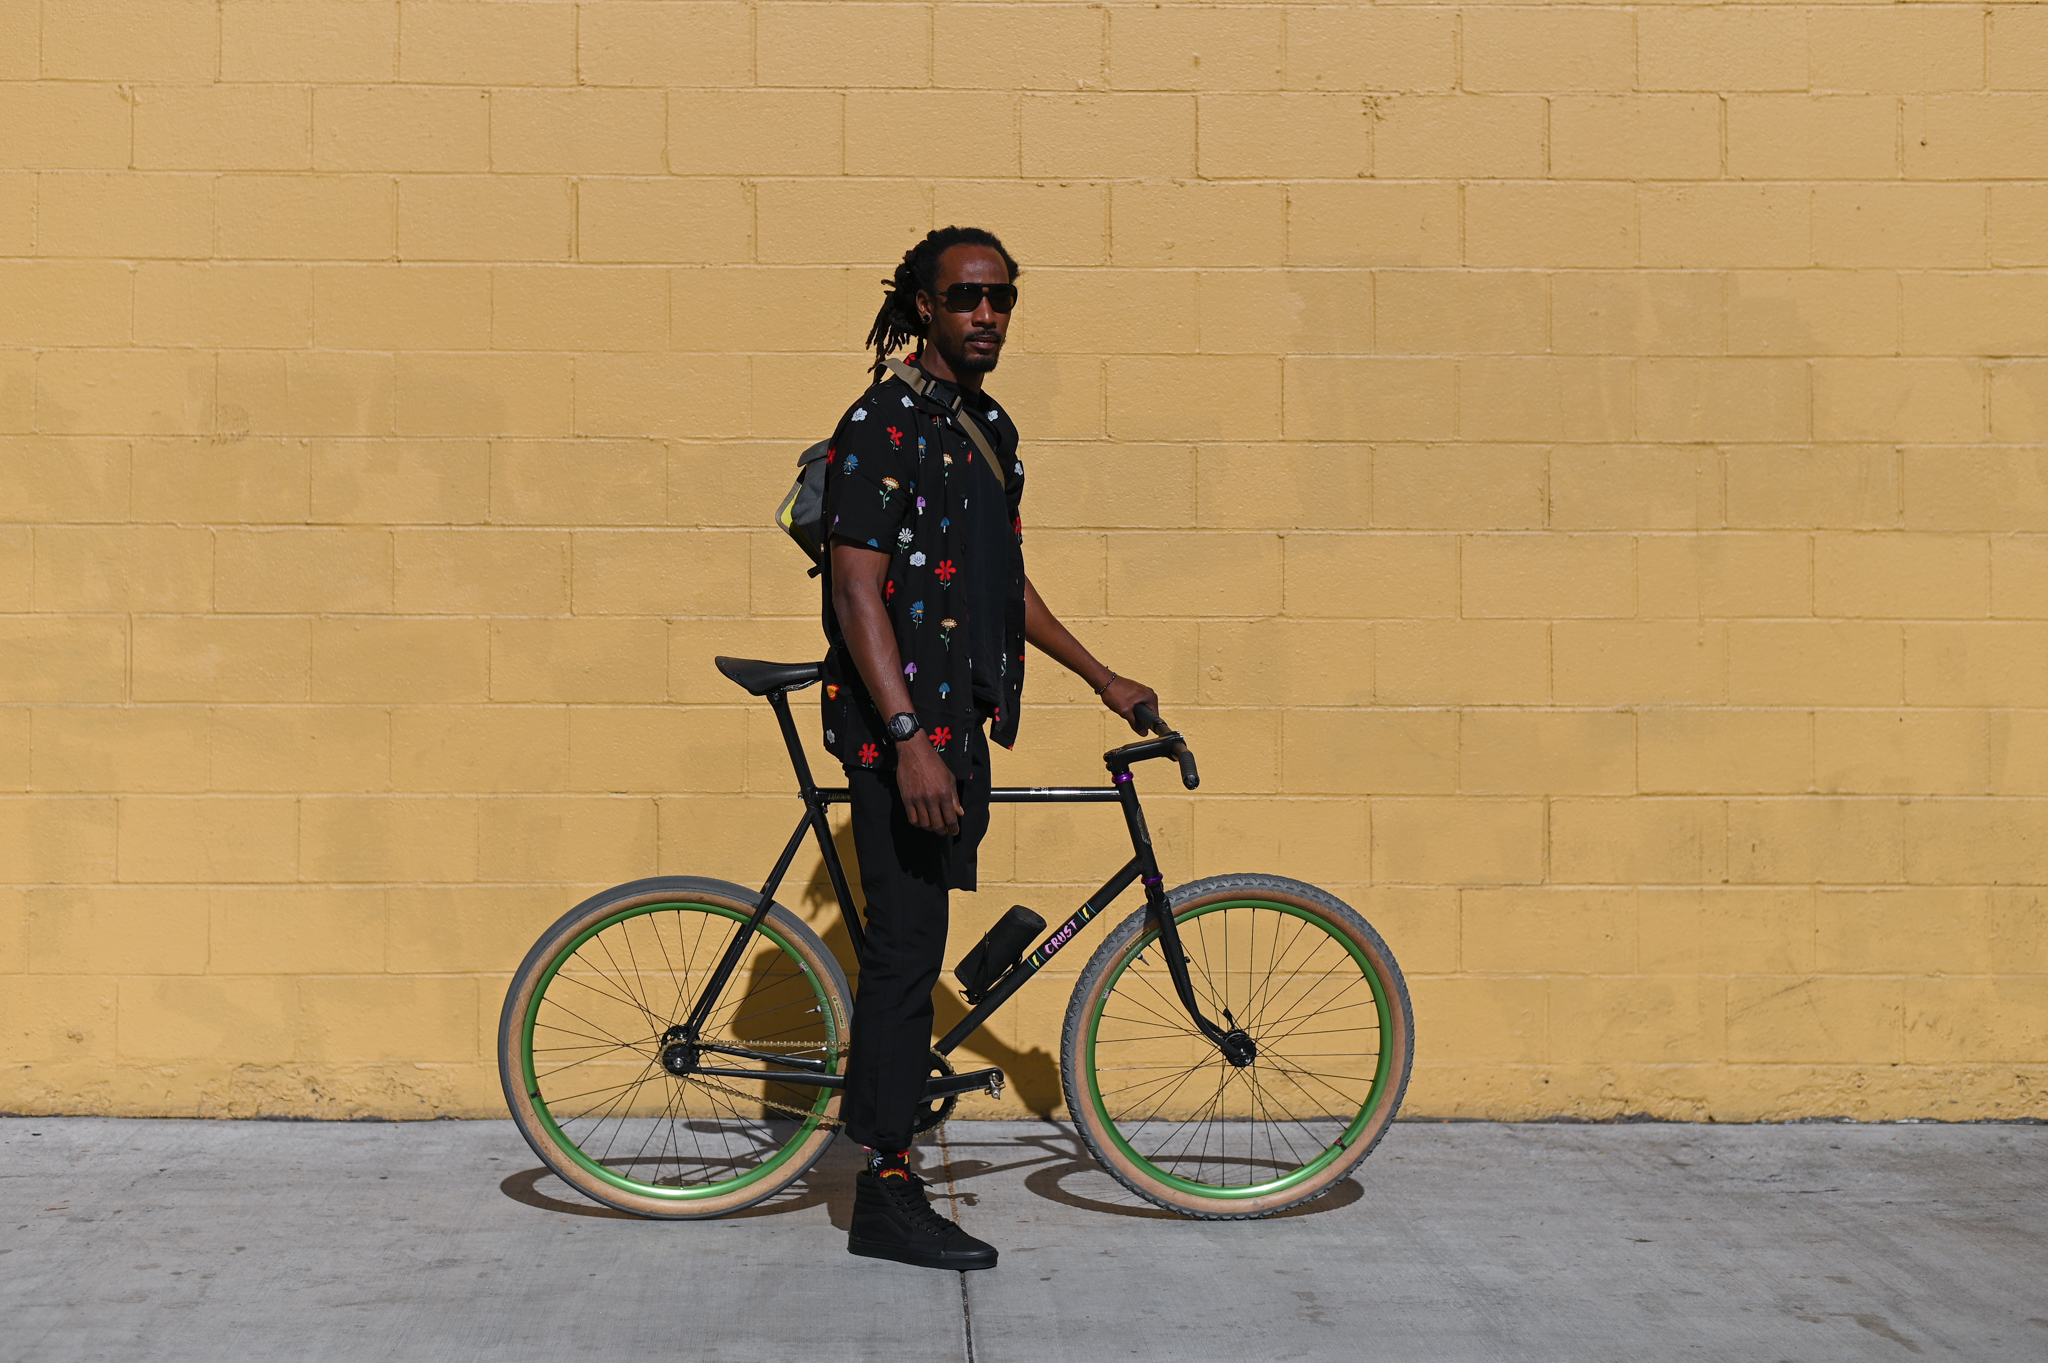 Leo, a black man with dreadlocks and one leg, is wearing slick black clothes and standing with his bike against a beige brick wall